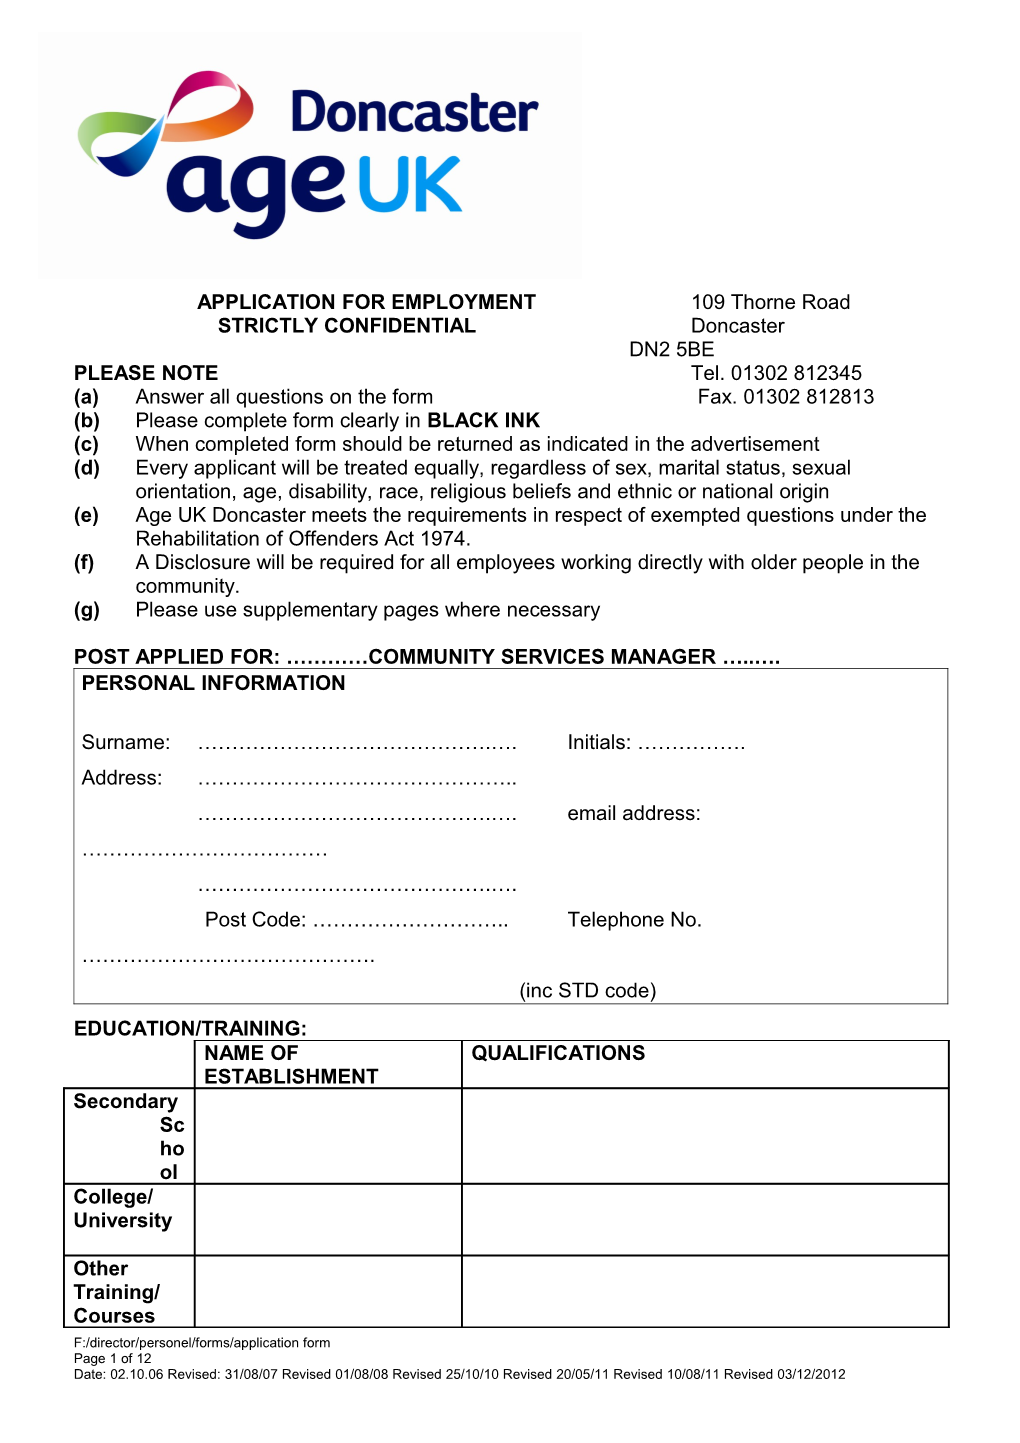 Application for Employment s190